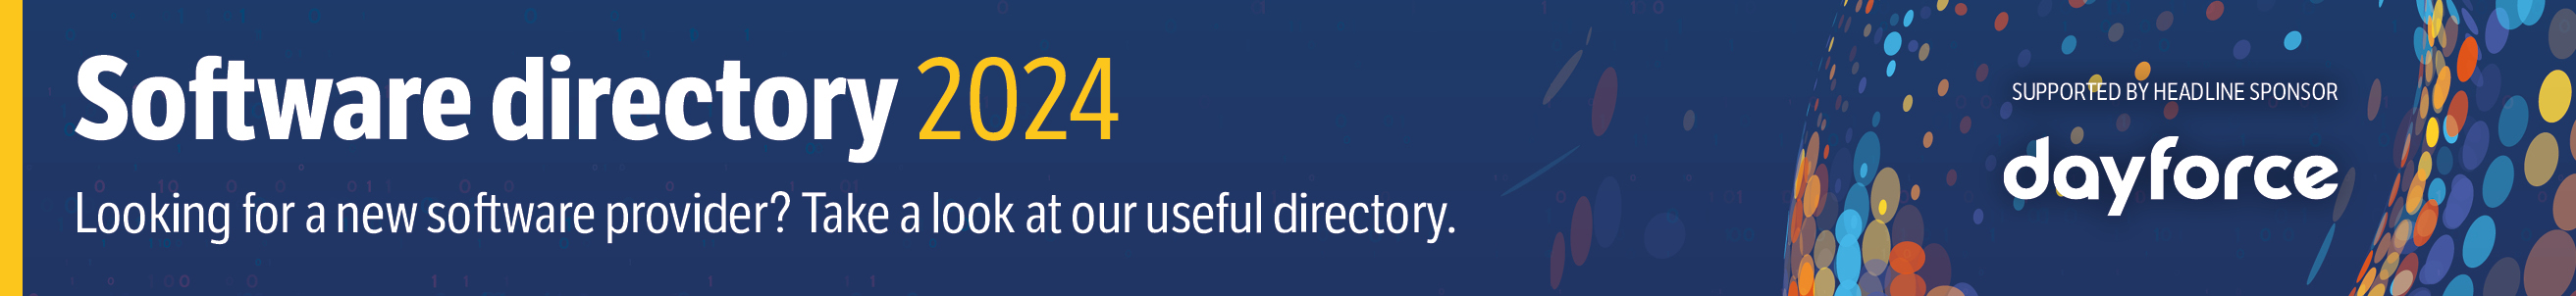 Software directory 2024 banner